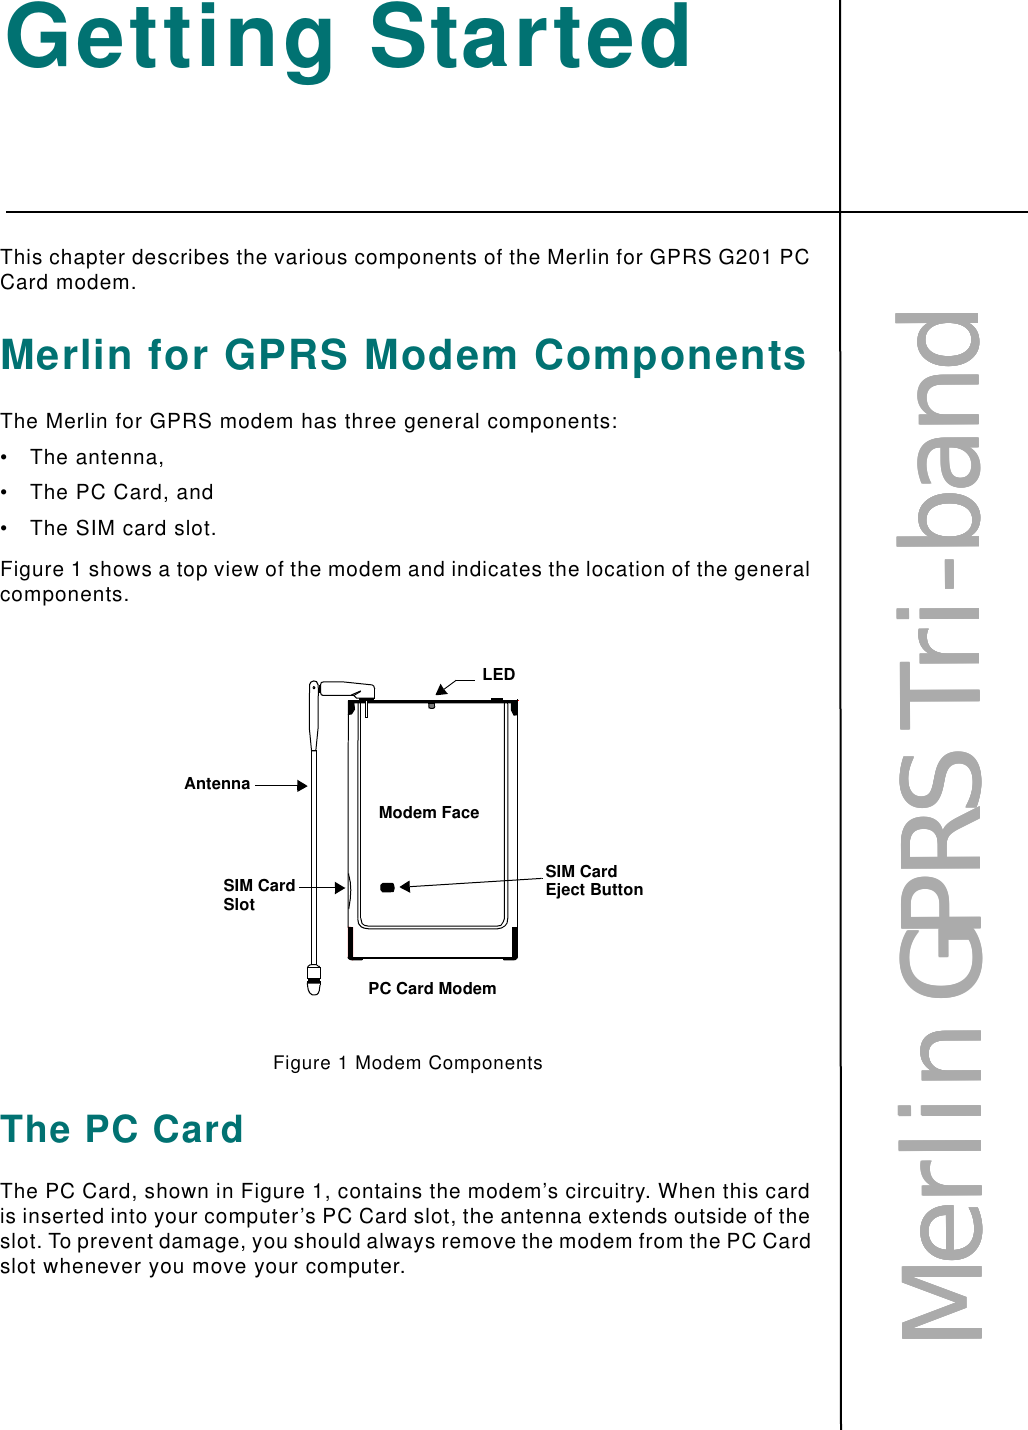 MMMMeeeerrrrlllliiiinnnn    GGGGPPPPRRRRSSSS    TTTTrrrriiii----bbbbaaaannnnddddGetting StartedThis chapter describes the various components of the Merlin for GPRS G201 PC Card modem. Merlin for GPRS Modem ComponentsThe Merlin for GPRS modem has three general components:• The antenna,• The PC Card, and• The SIM card slot.Figure 1 shows a top view of the modem and indicates the location of the general components.Figure 1 Modem ComponentsThe PC CardThe PC Card, shown in Figure 1, contains the modem’s circuitry. When this card is inserted into your computer’s PC Card slot, the antenna extends outside of the slot. To prevent damage, you should always remove the modem from the PC Card slot whenever you move your computer.AntennaModem FaceSIM CardSlotPC Card ModemSIM CardEject ButtonLED